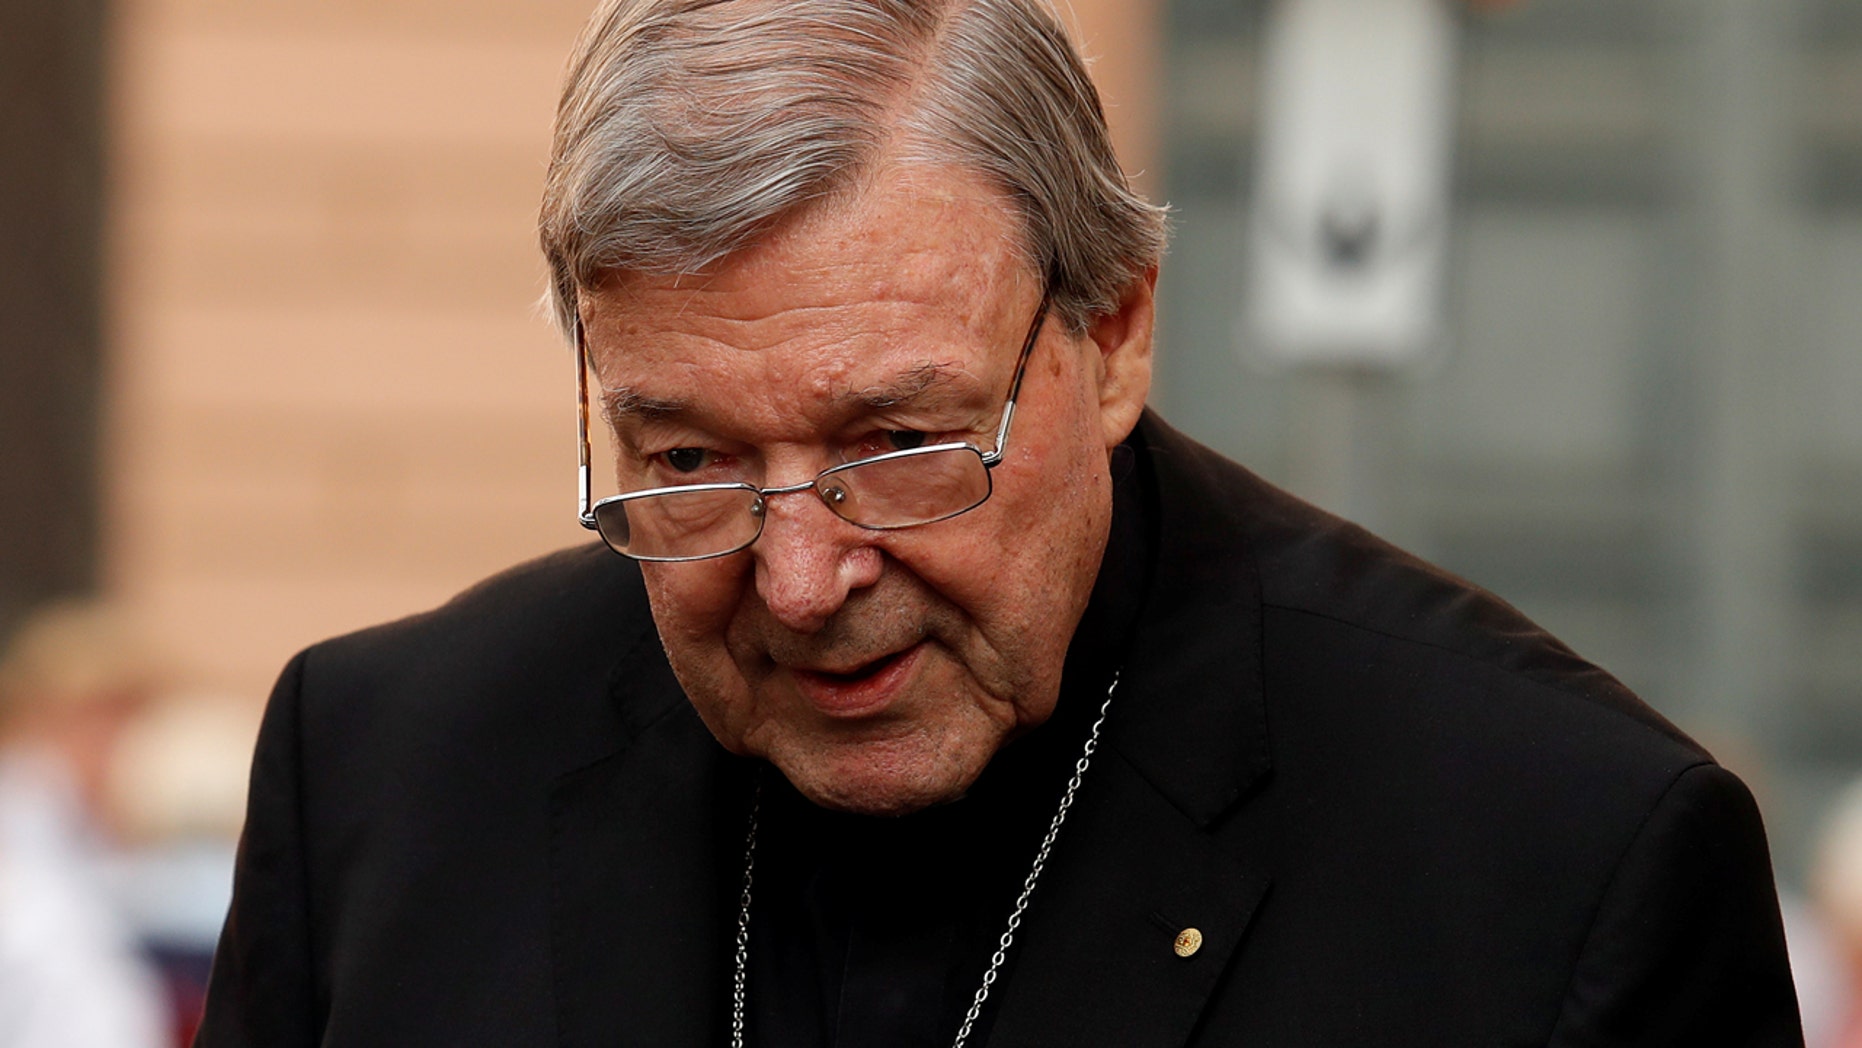 Vatican Cardinal Hit With Sex Assault Offenses Takes Leave Will Fight 